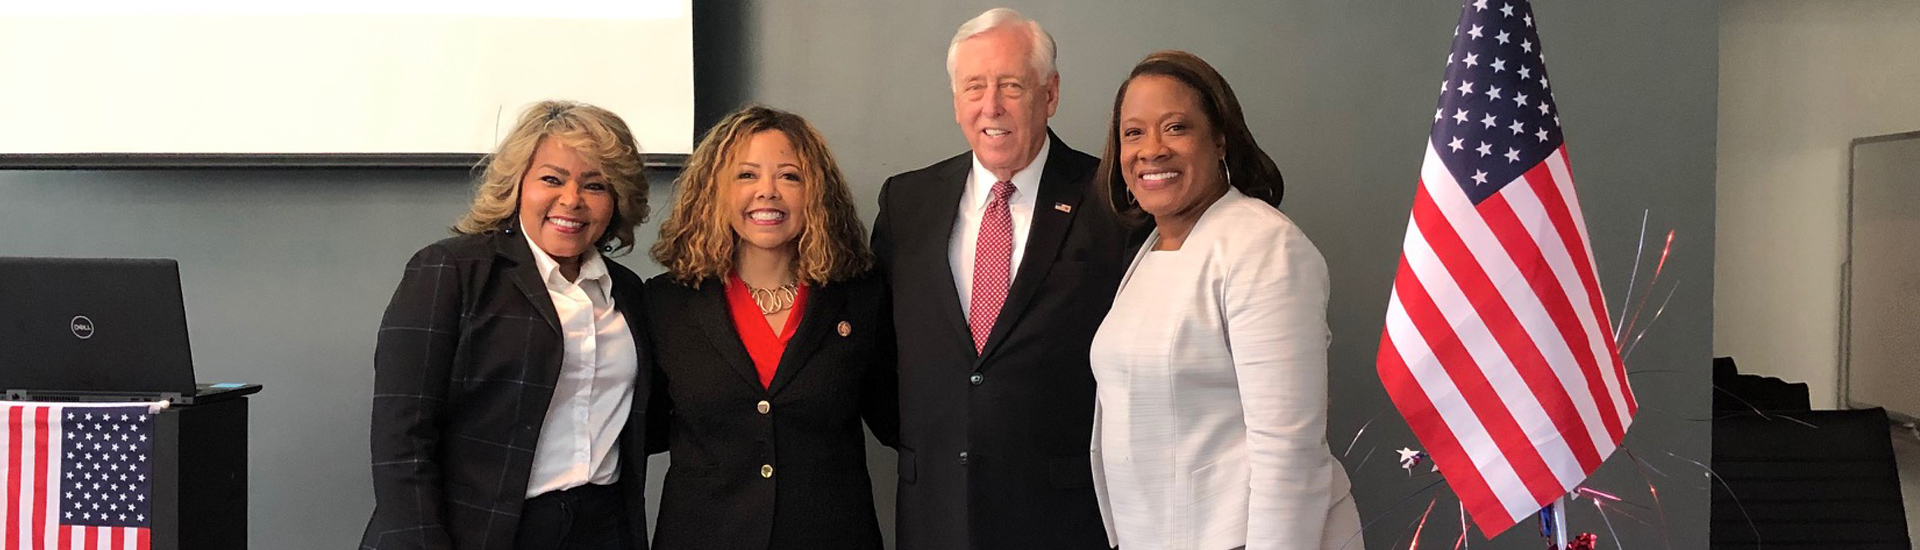 Hoyer standing with other professionally dressed women by an American flag